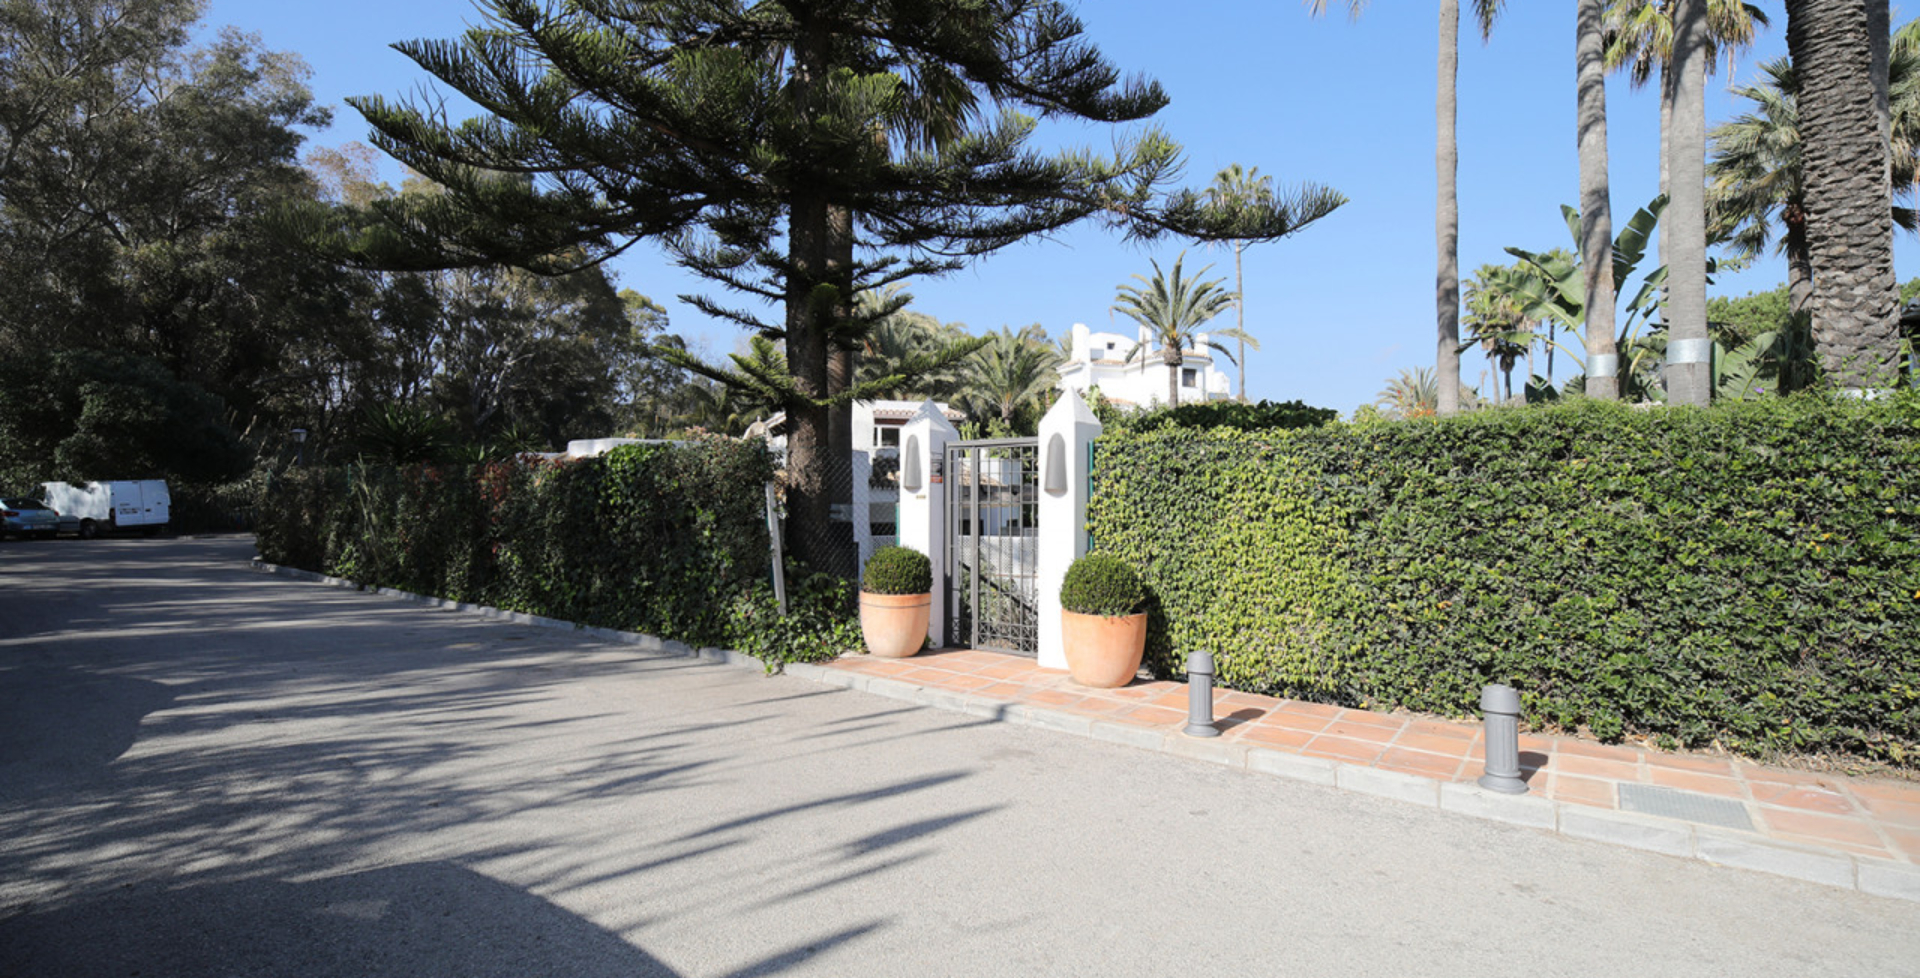 4 bed luxapart5 – external-entrance